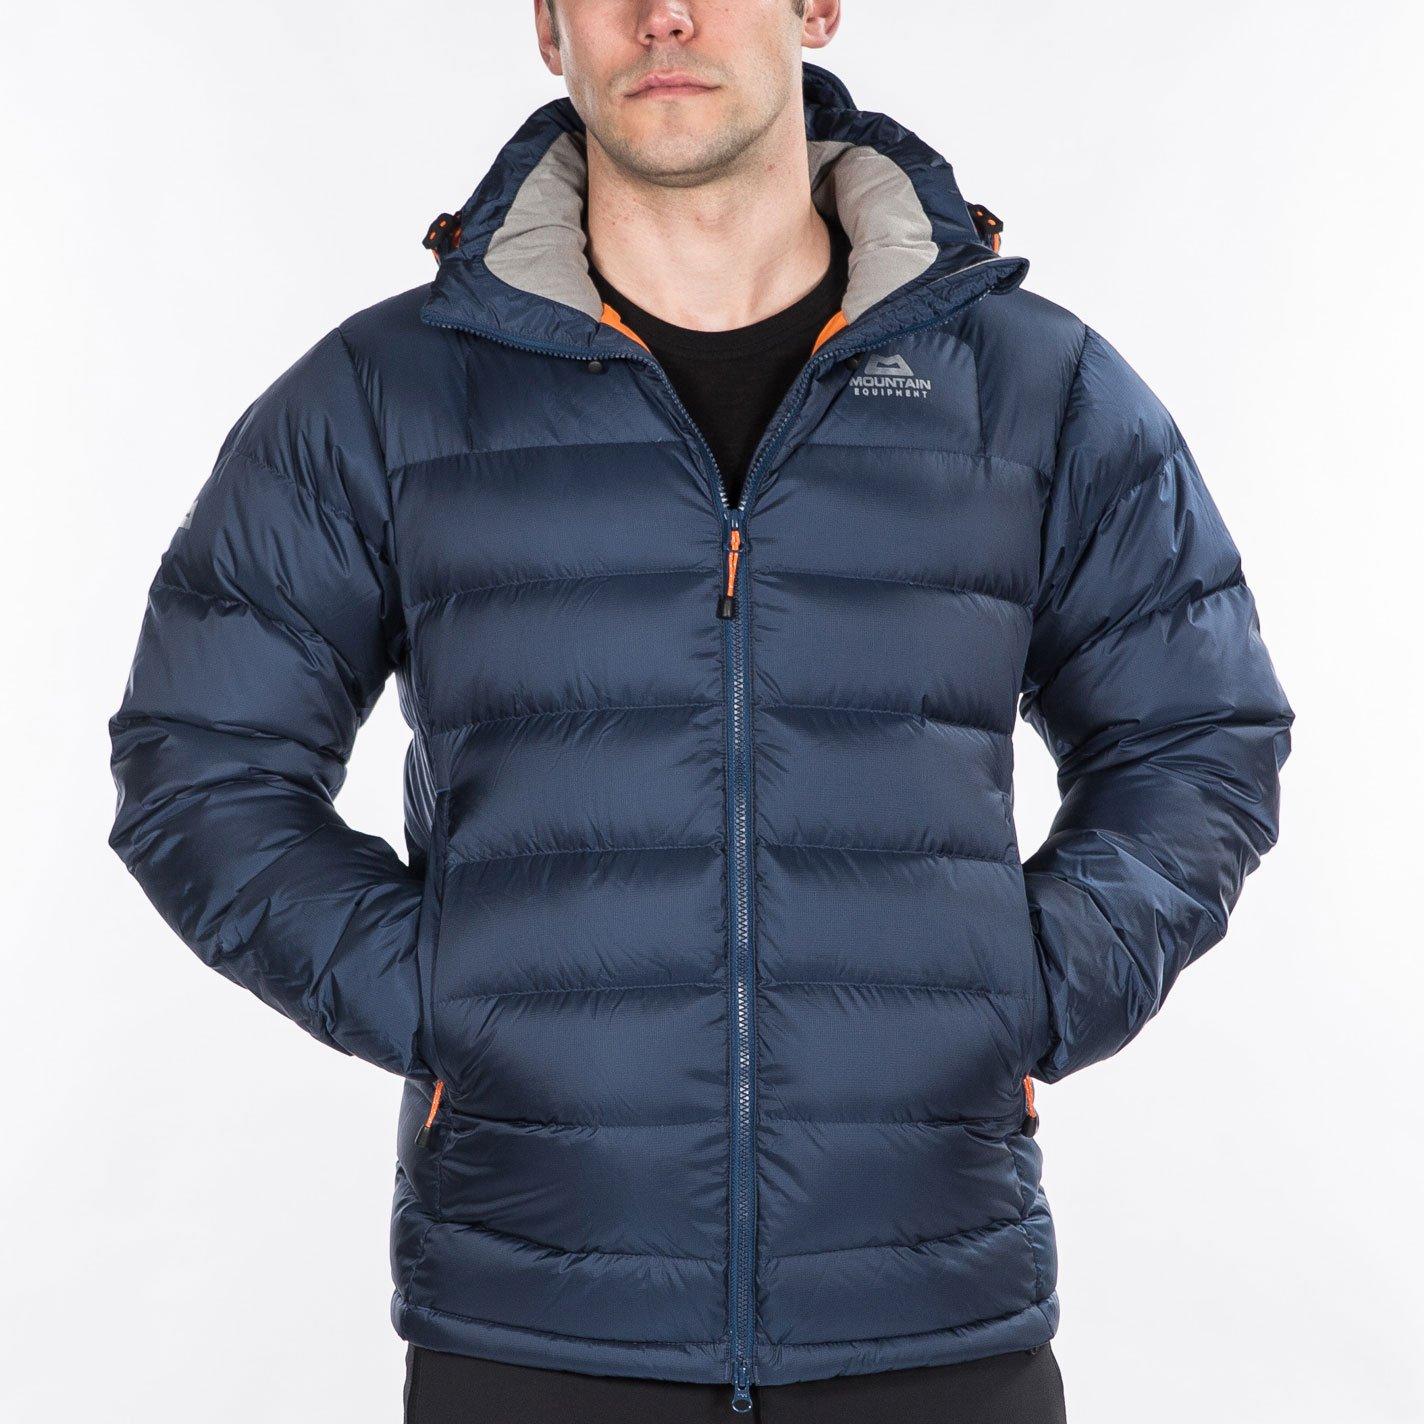 Mountain Equipment Mens Down Jacket | vlr.eng.br